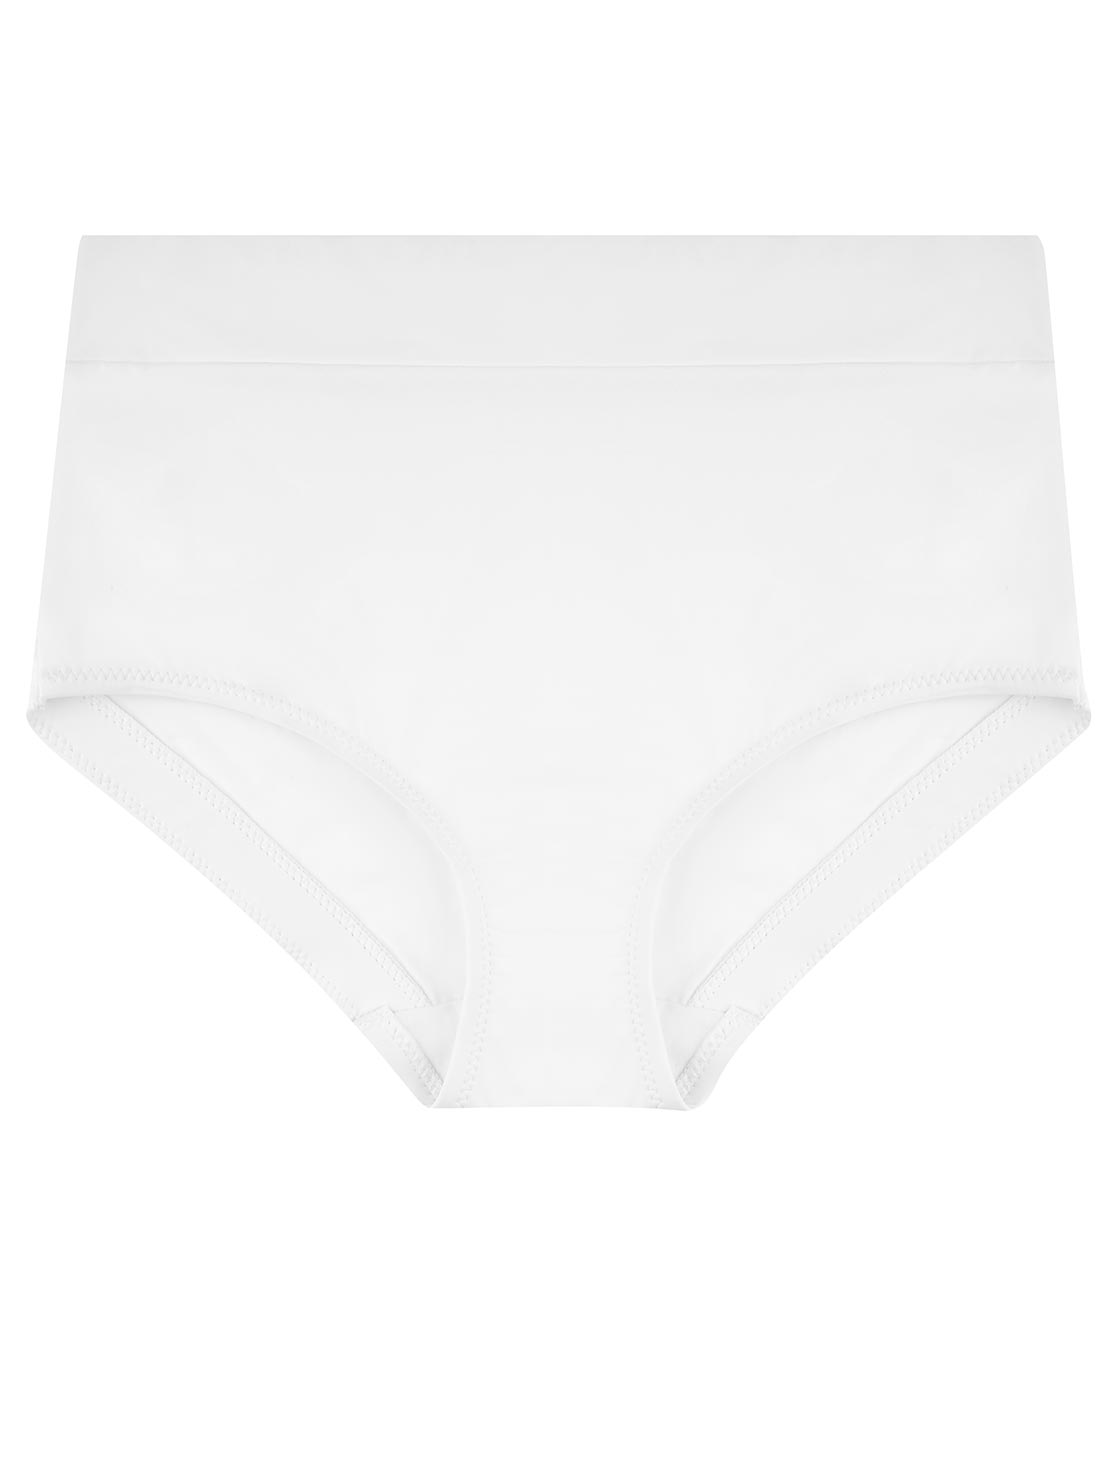 Panties for woman - Shop Ilusion